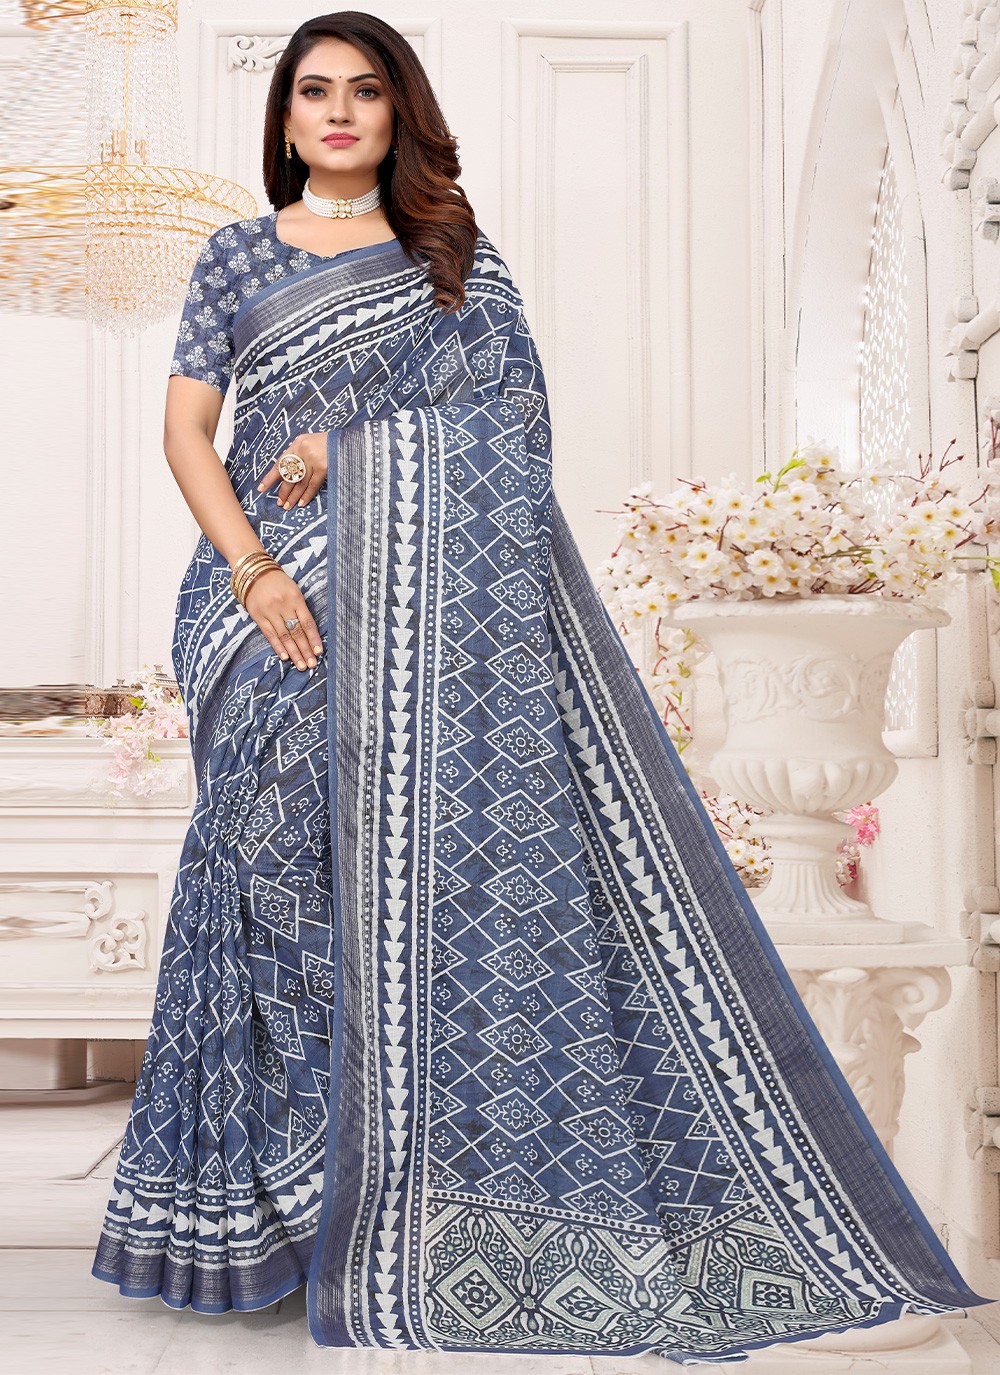 Buy Printed Sarees Online For Women At Best Prices – Koskii